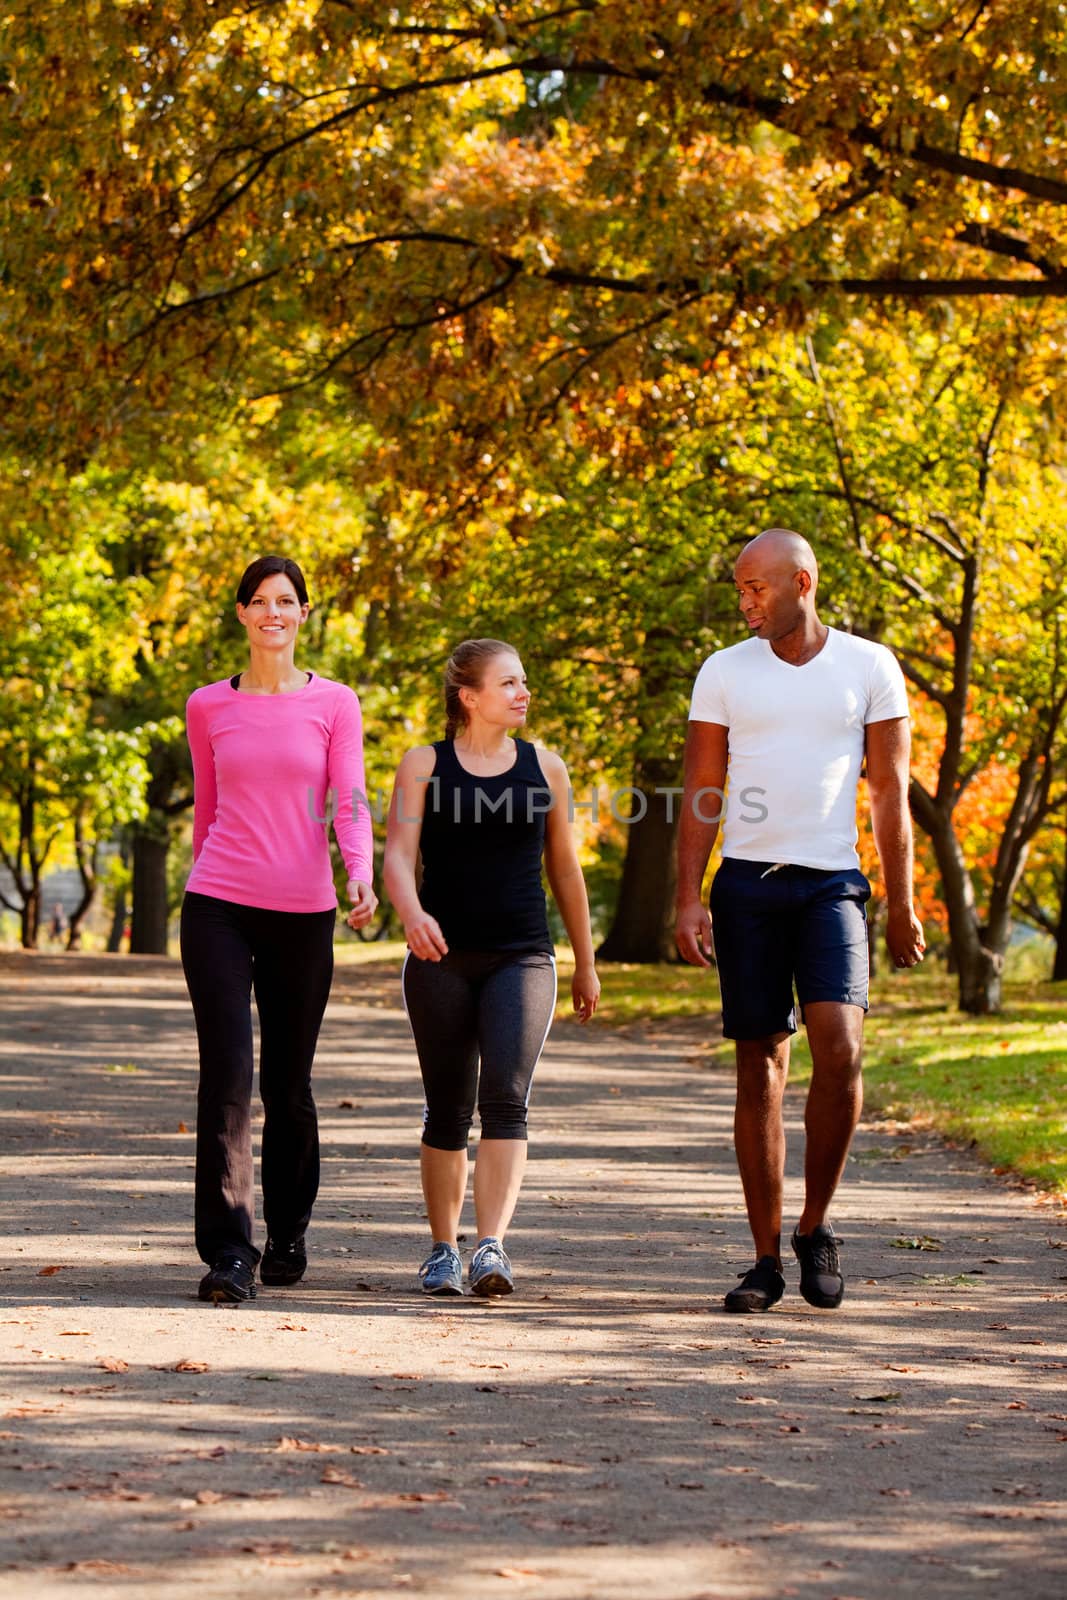 Three people walking in a park, getting some exercise